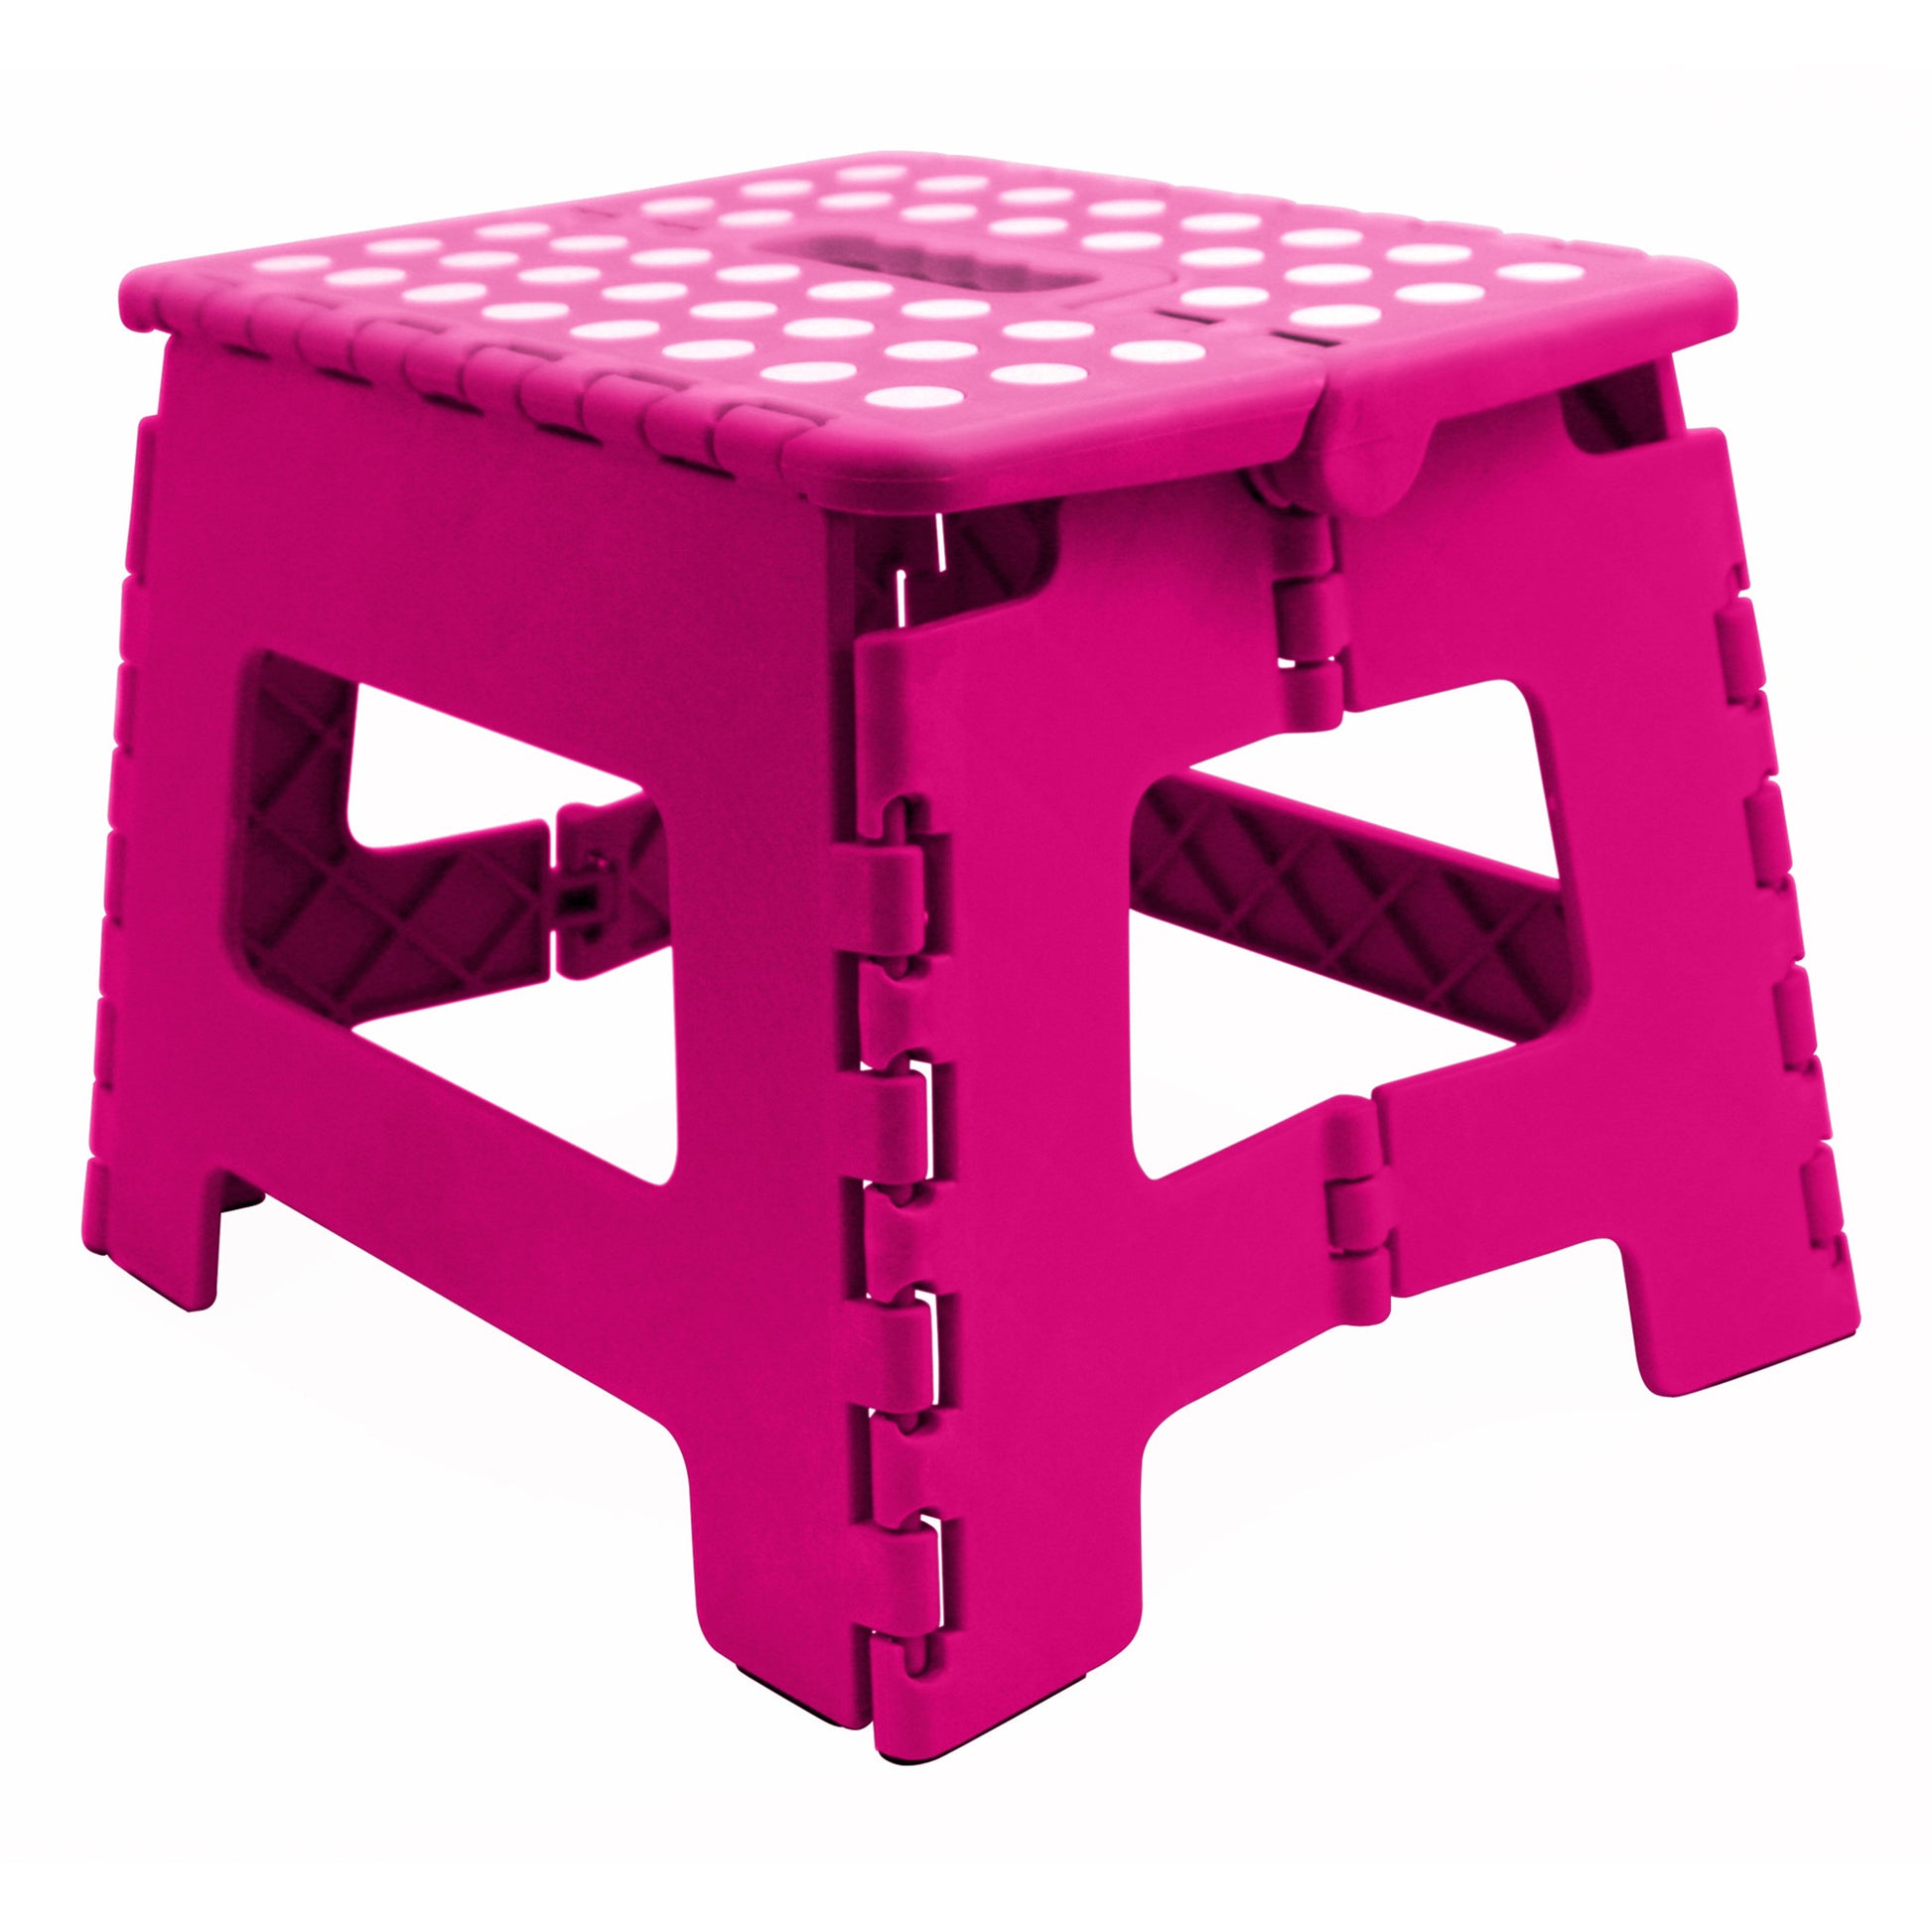 Home Basics Small Plastic Folding Stool with Non-Slip Dots, Pink - Pink